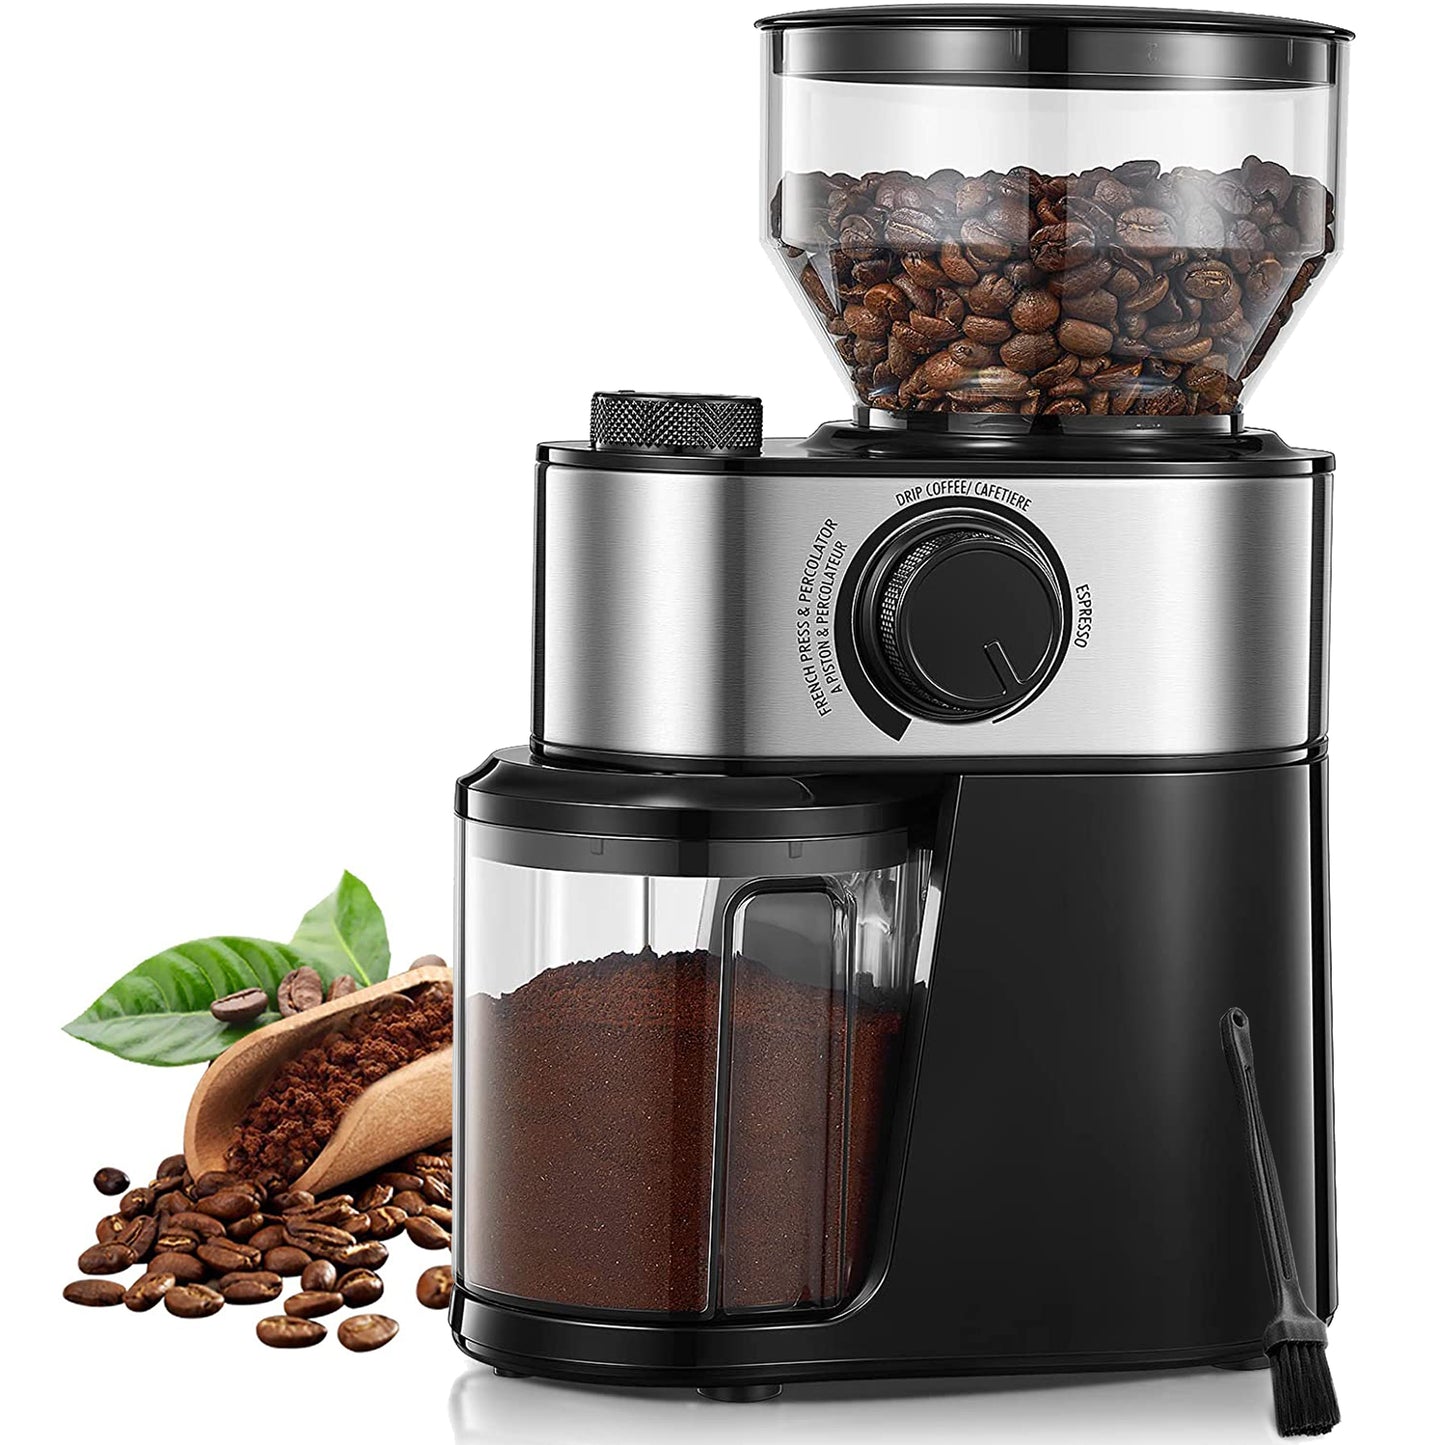 Electric Burr Coffee Grinder, Adjustable Burr Mill Coffee Bean Grinder with 18 Grind Settings,  FOHERE Burr Coffee Grinder for Drip, Percolator, French Press, Espresso and Turkish Electric Coffee Makers, 2-14 Cup, Black